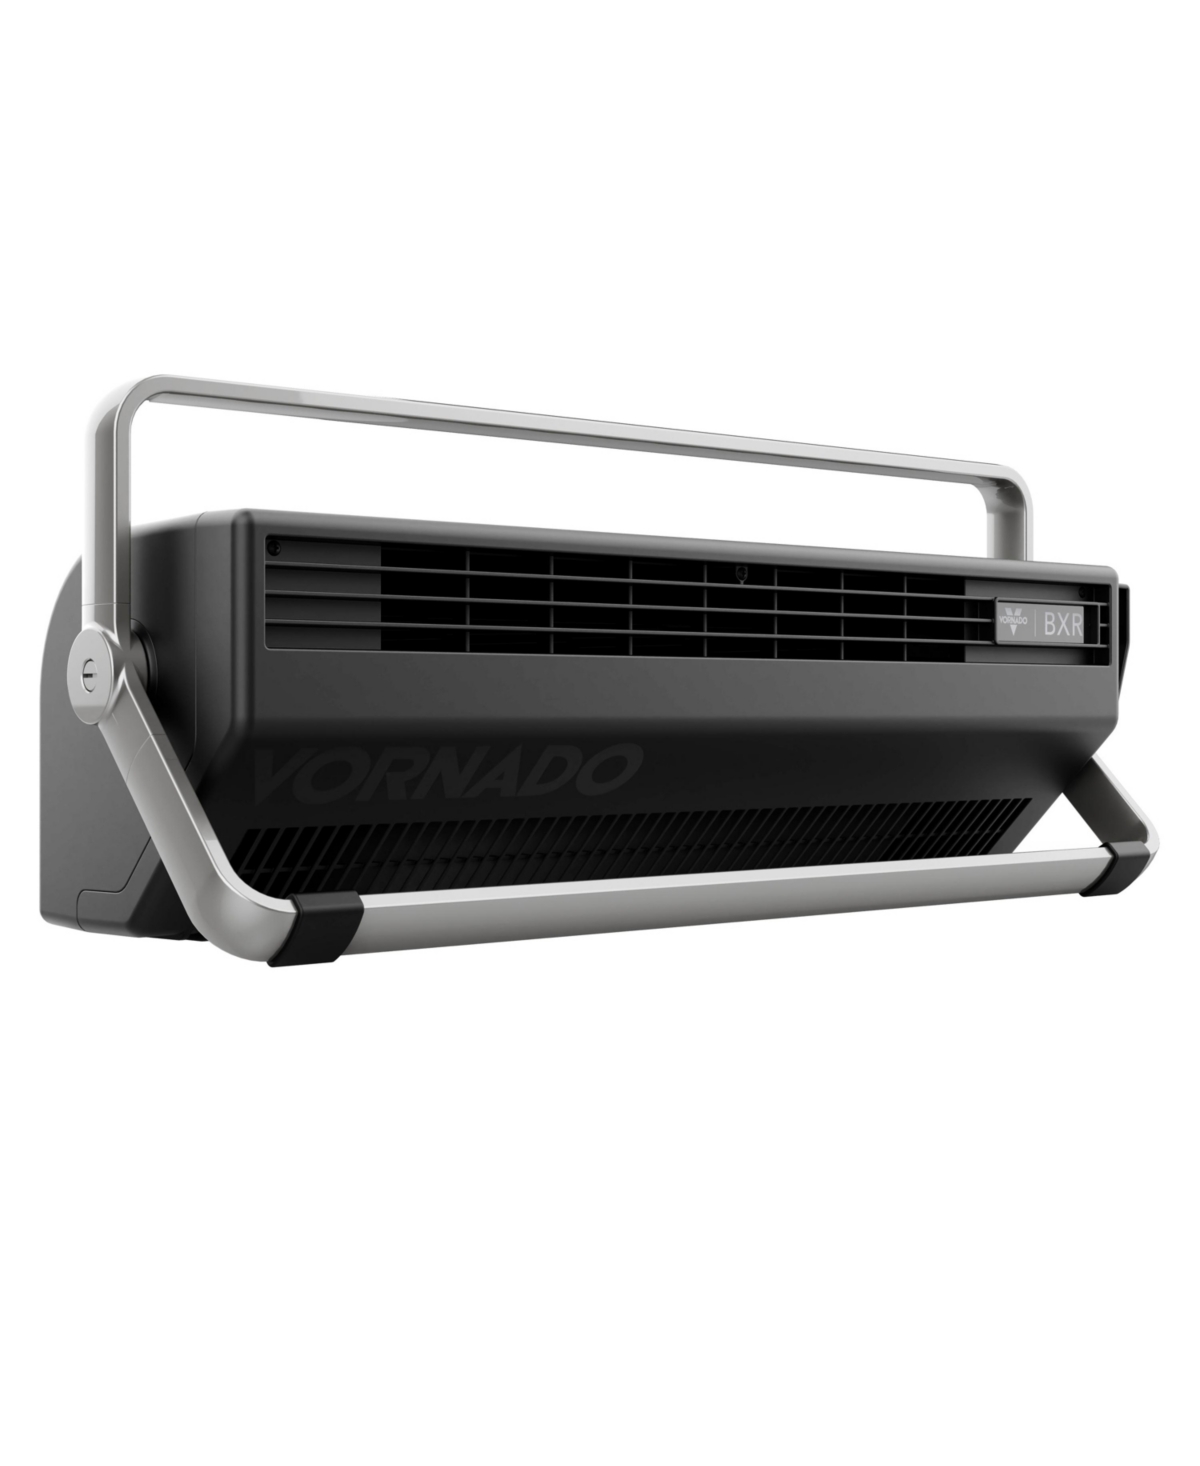 Shop Vornado Bxr Horizontal And Tower Fan, Multi-position And Multidirectional High Velocity Fan With Carry Handl In Black